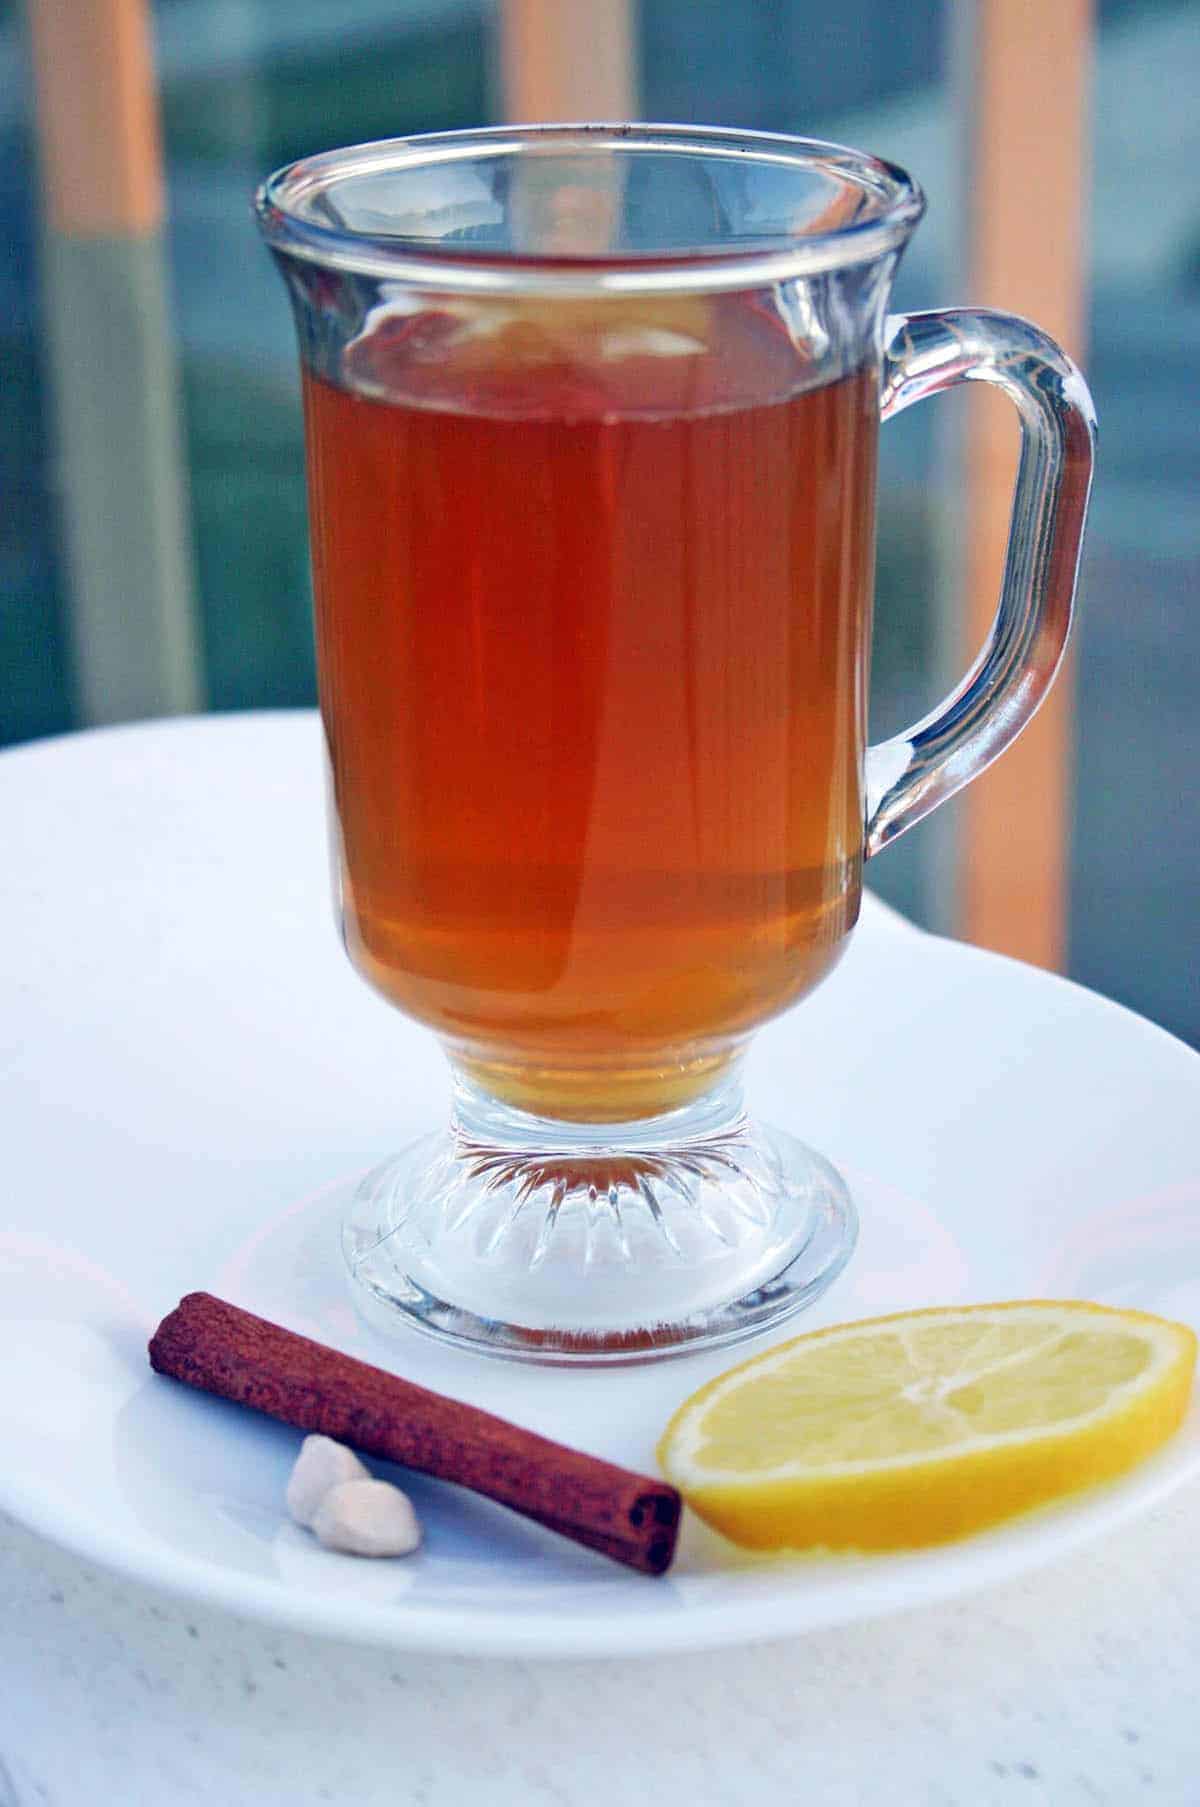 Spiced Ginger Tea in a glass mug on a white plate next to a slice of lemon, a cinnamon stick, and cardamom pods